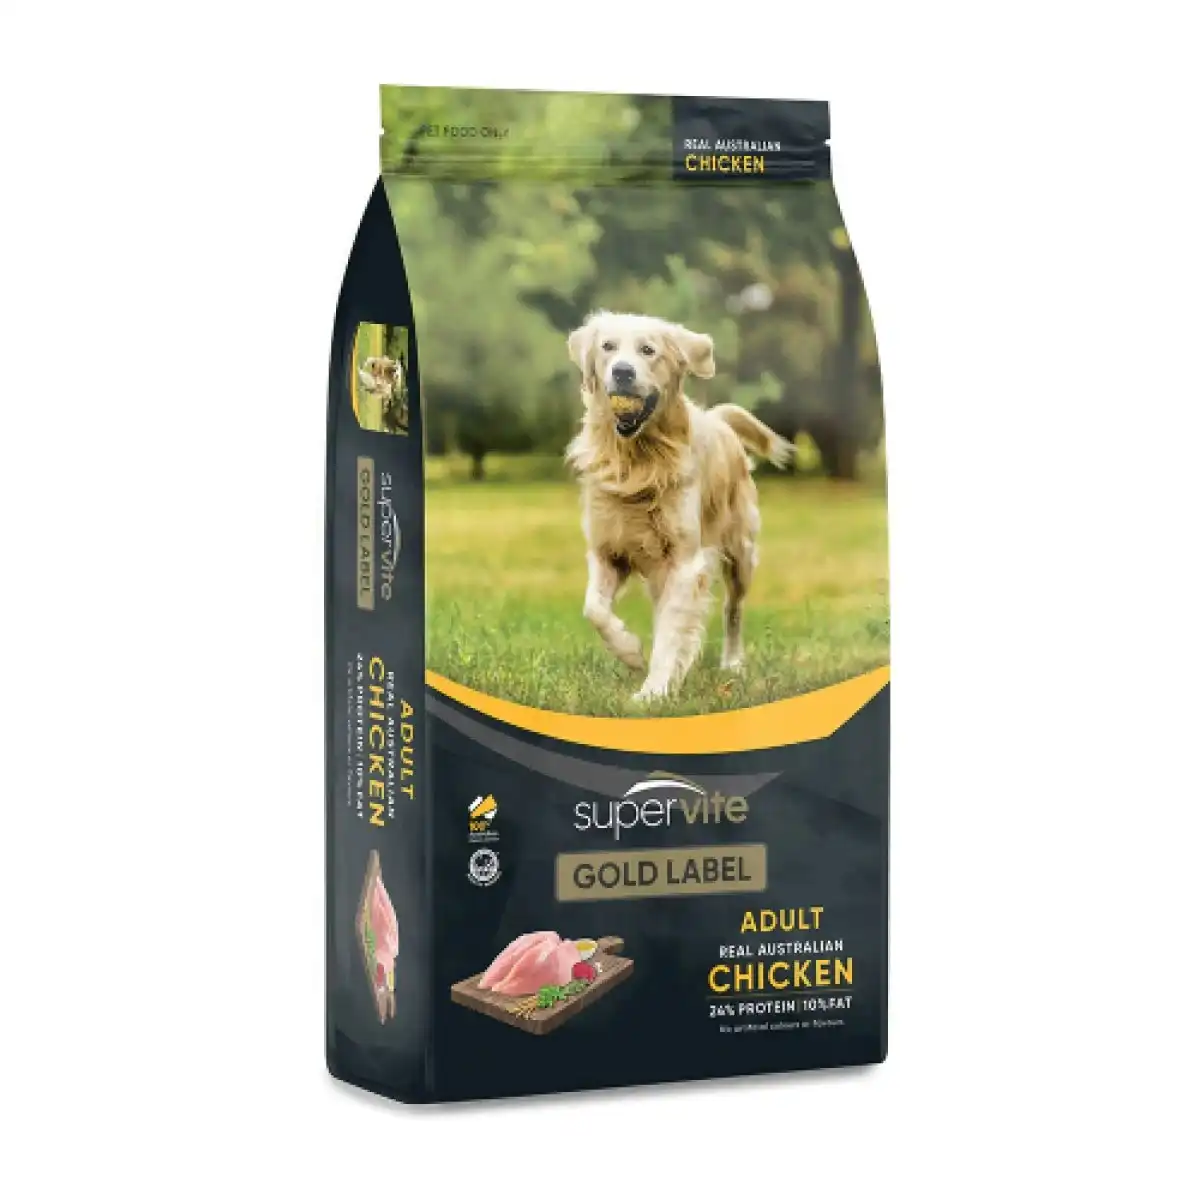 Super Vite Gold Label with Real Australian Chicken Dry Dog Food 20kg